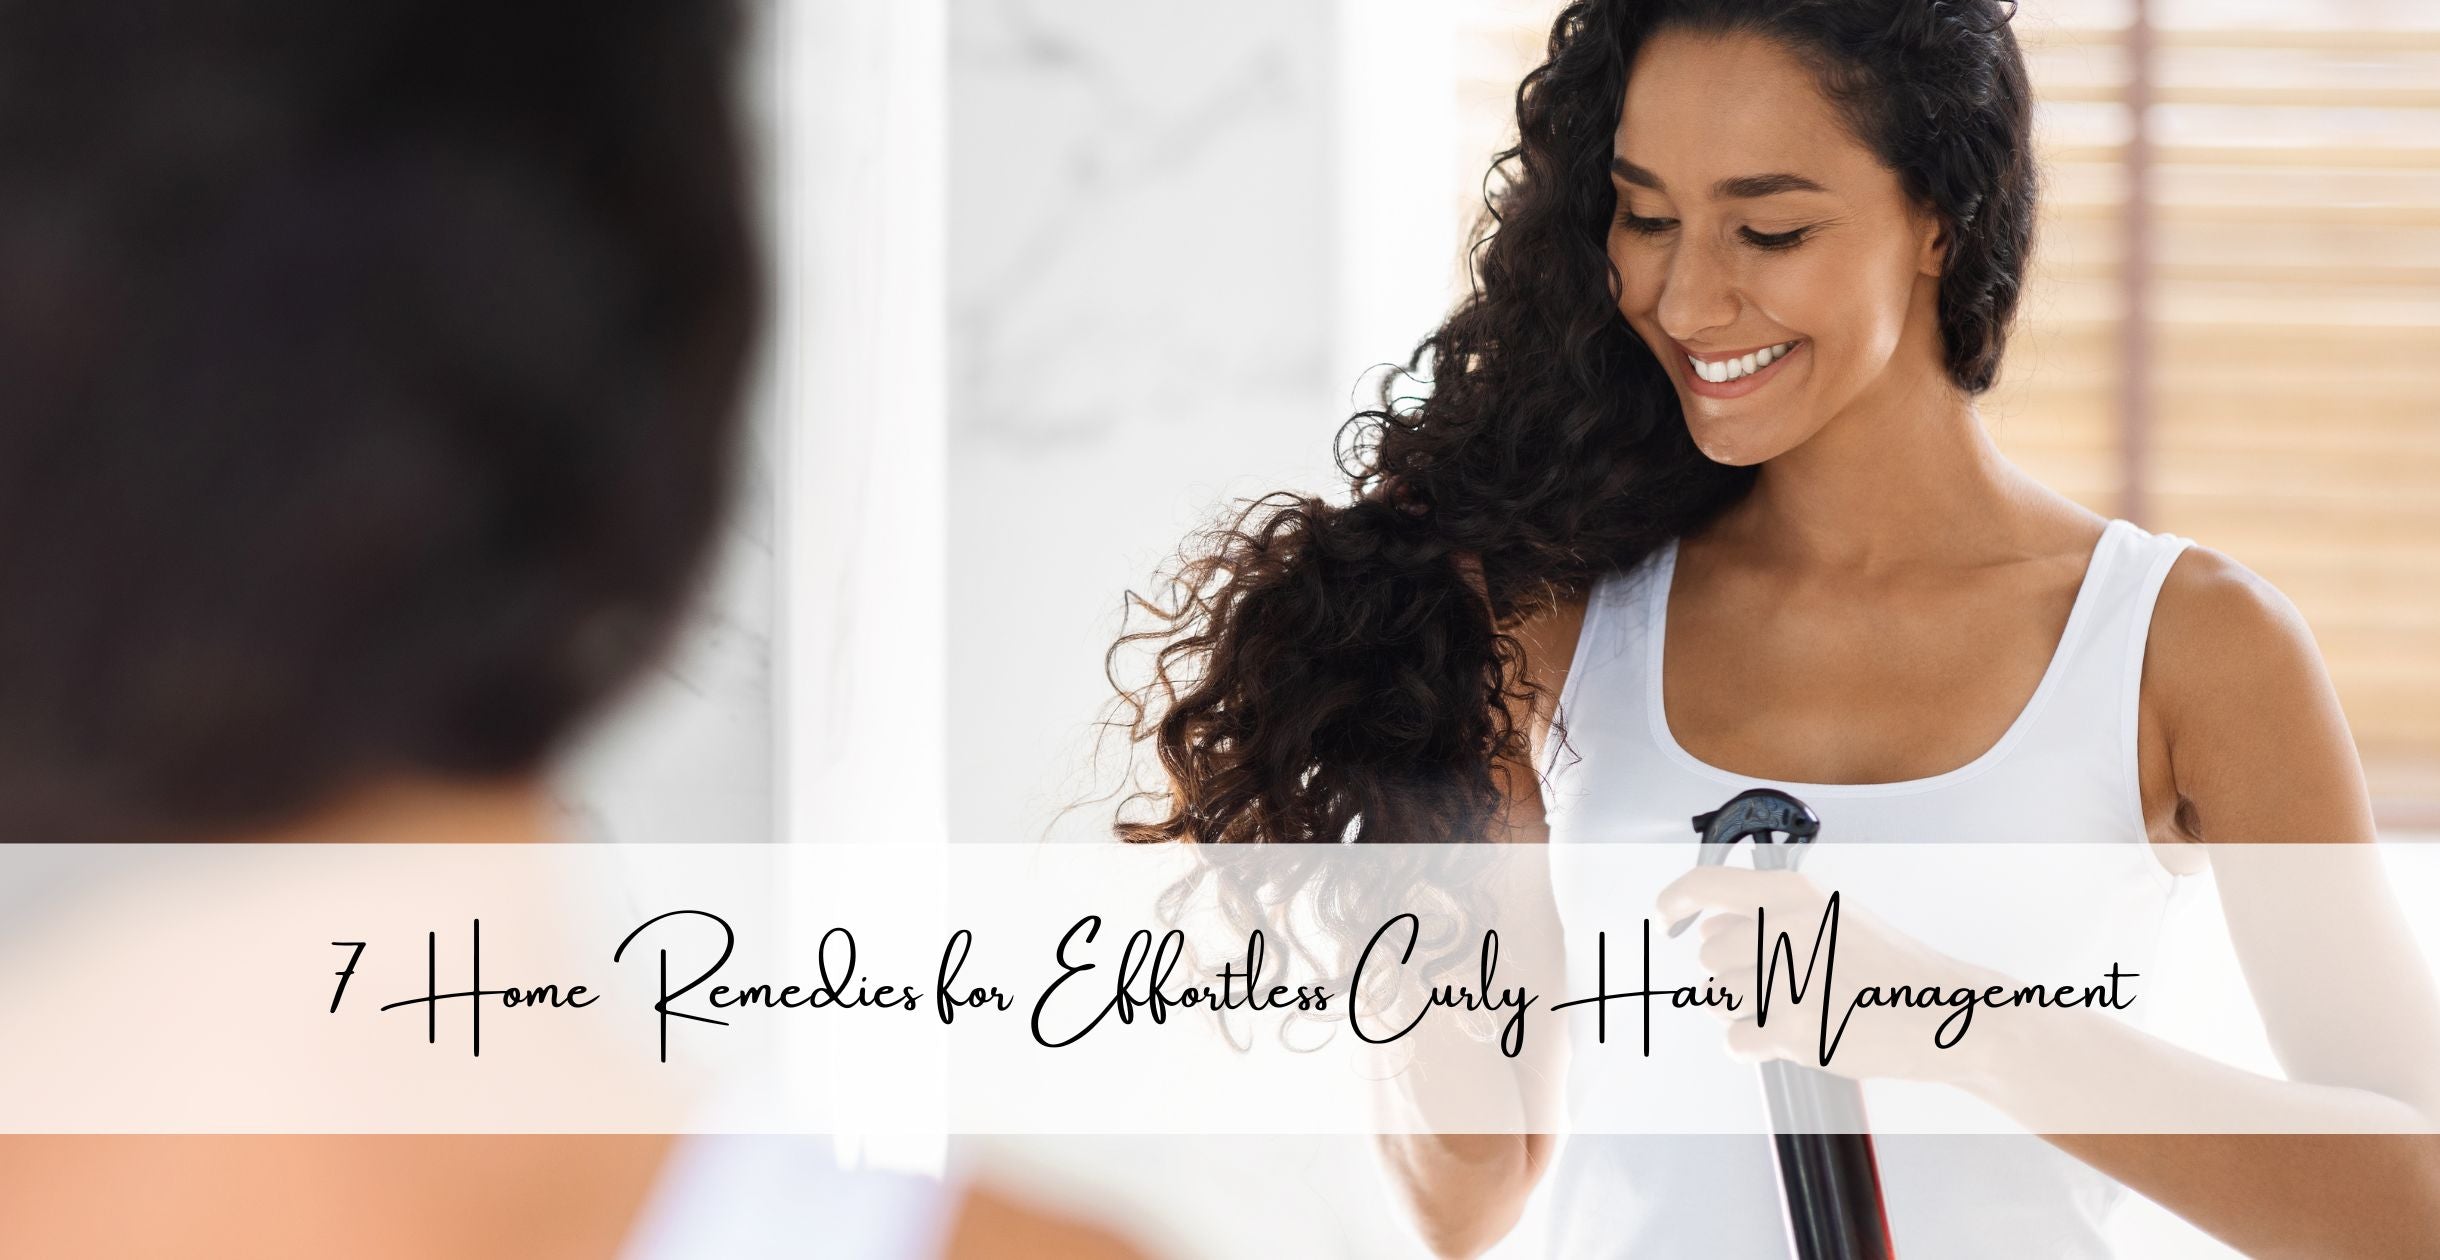 7 Home Remedies for Effortless Curly Hair Management